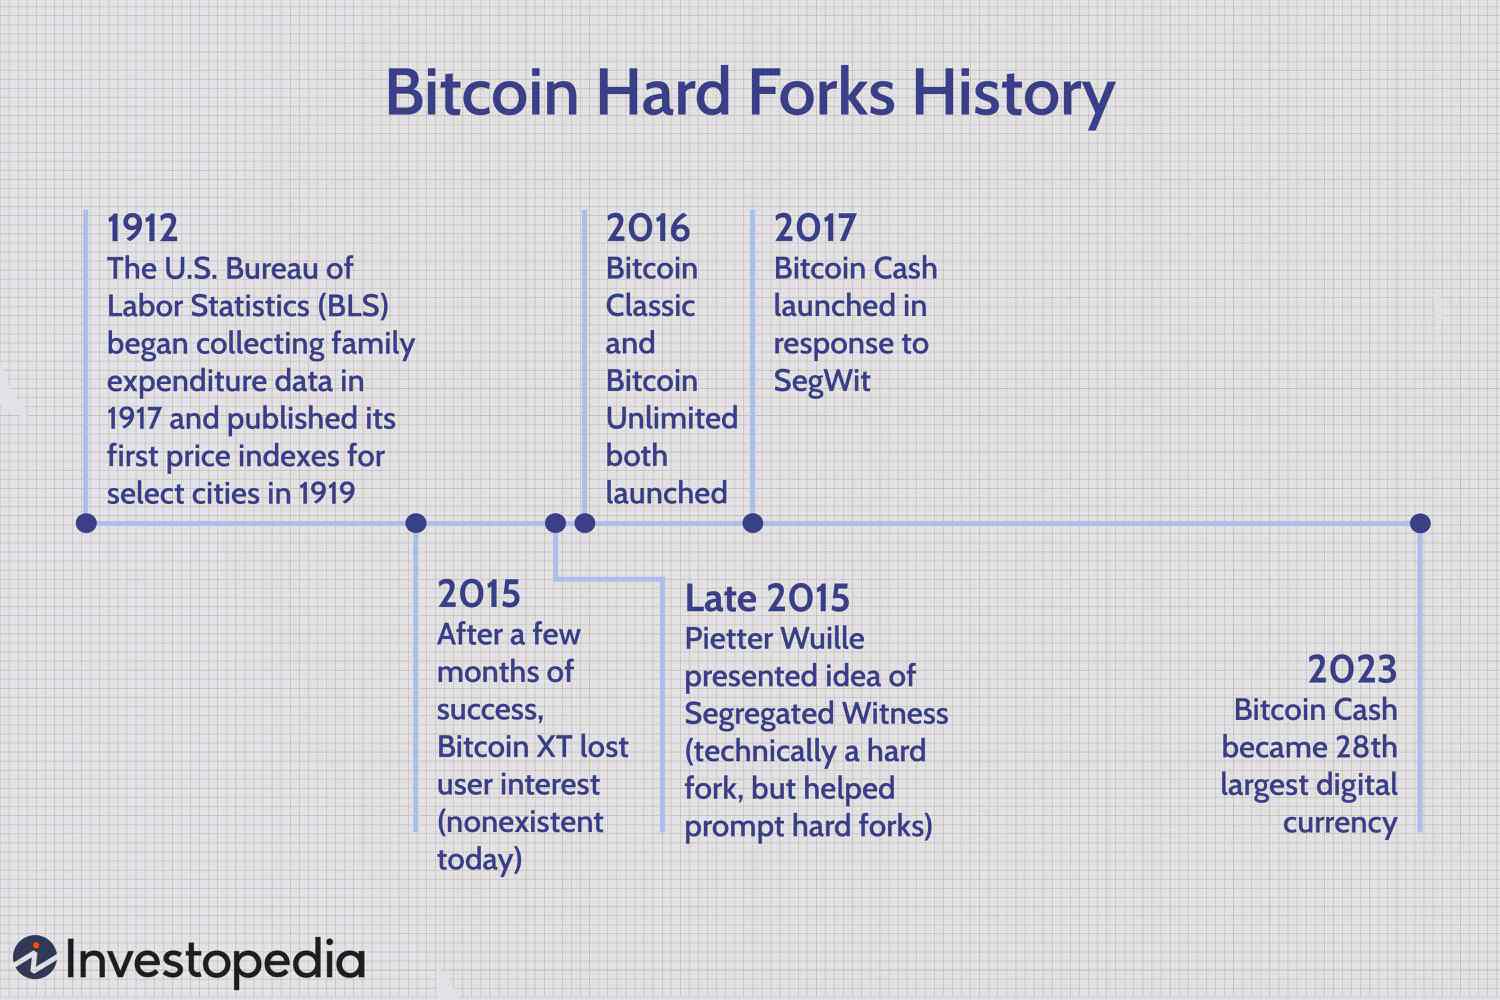 How Many Bitcoin Forks Are There? - bitcoinhelp.fun